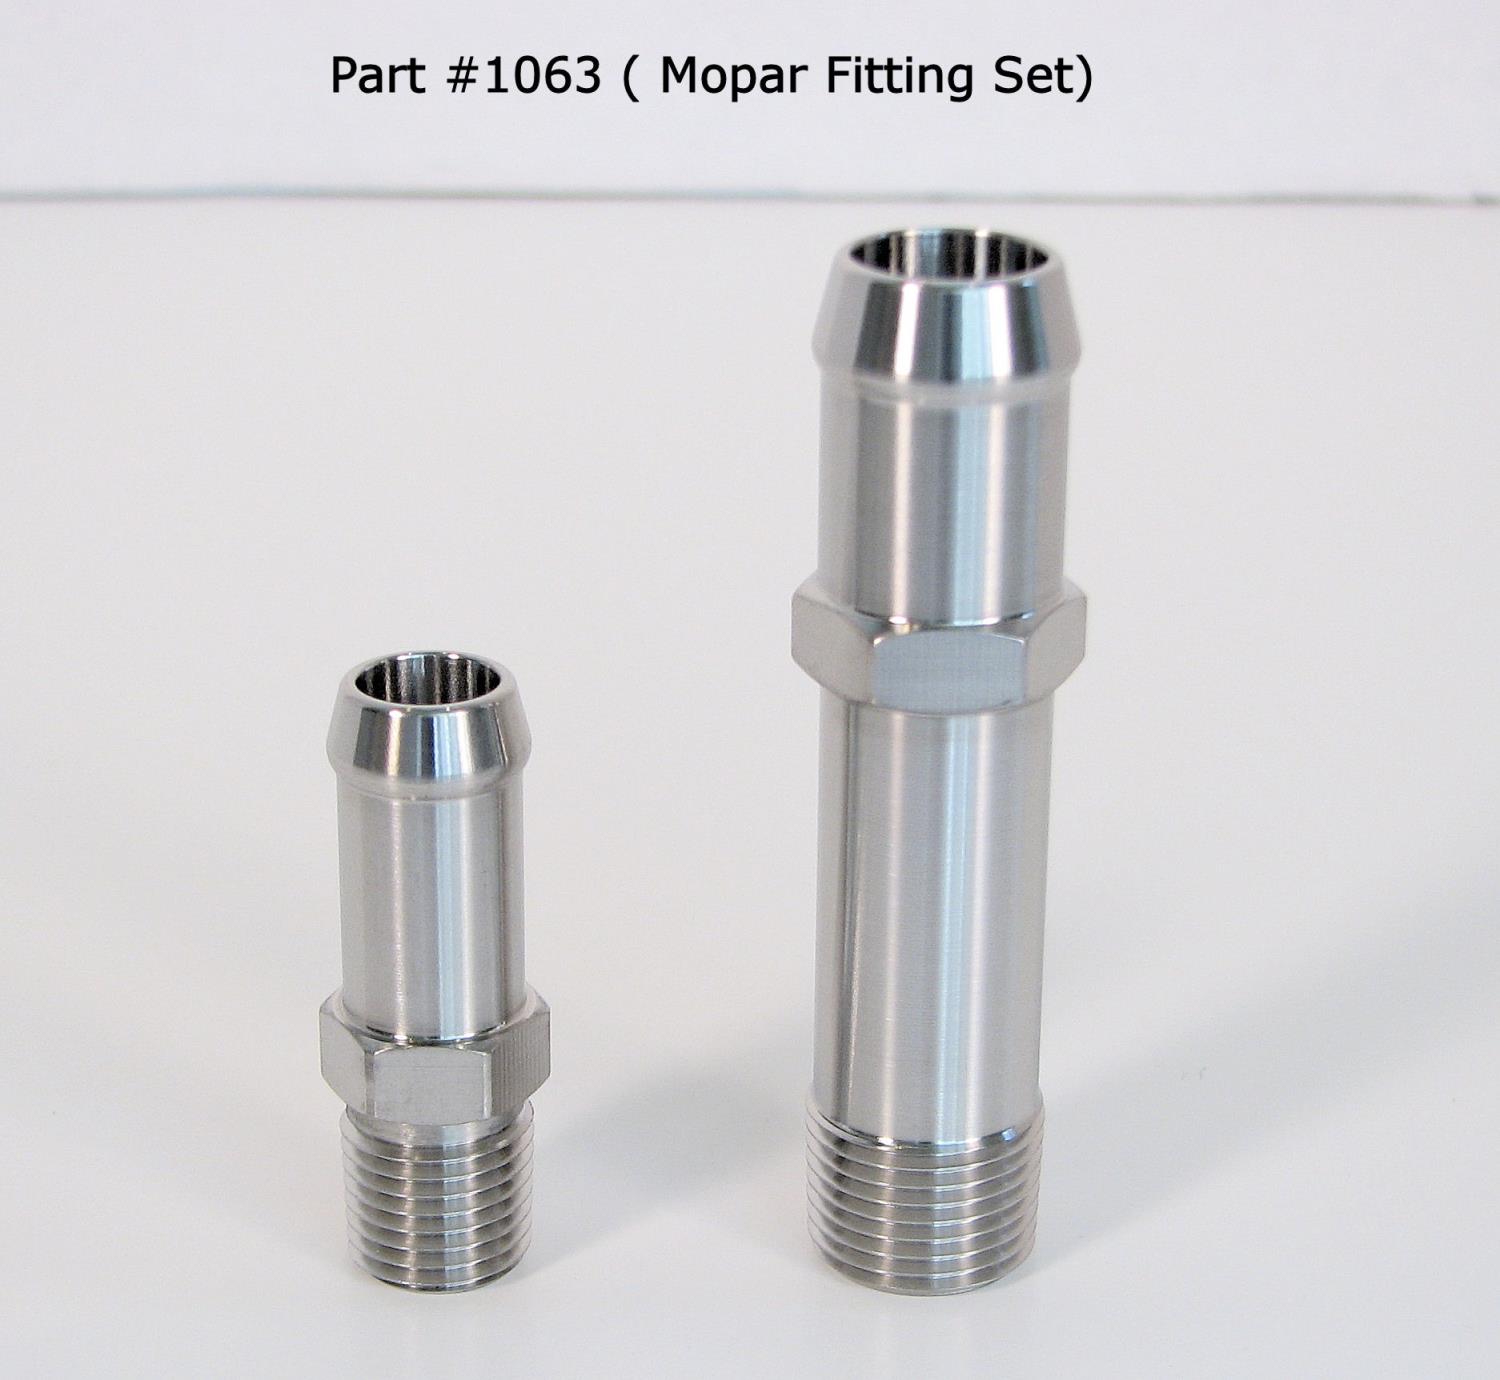 Heater Hose Fitting Set Includes: 3/8 in. NPT x 5/8 in. Hose - 3 in. L, (1) 1/4 in. NPT x 1/2 in. Hose - 1 3/4 in. L [Natural]